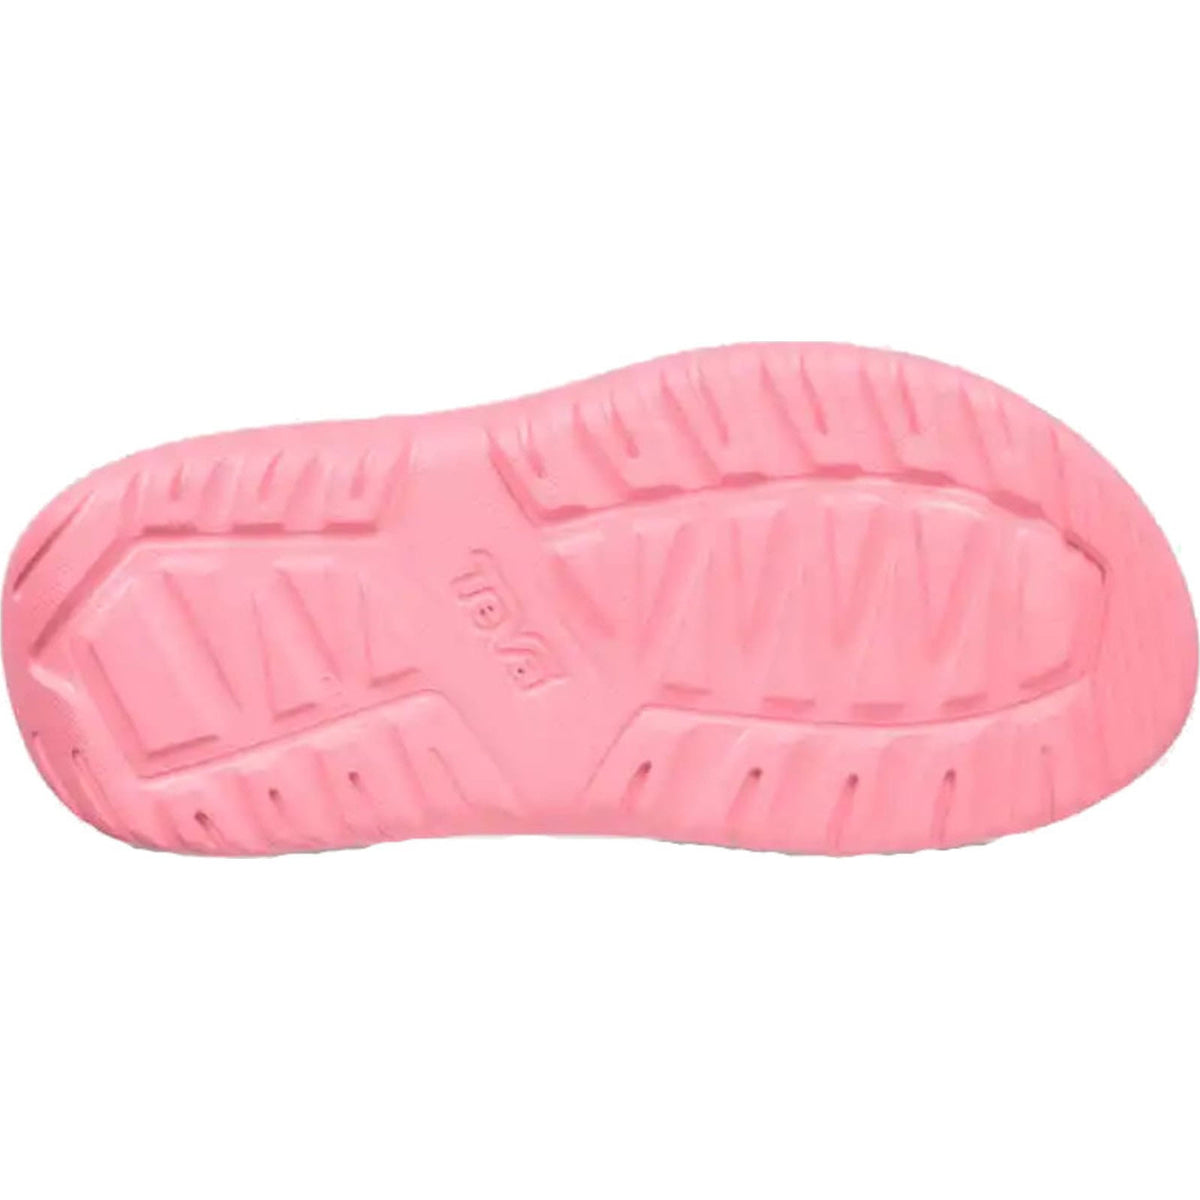 A Teva Hurricane Drift Pink Lemonade - Kids outdoor sandal with tread pattern and an adjustable hook-and-loop strap.